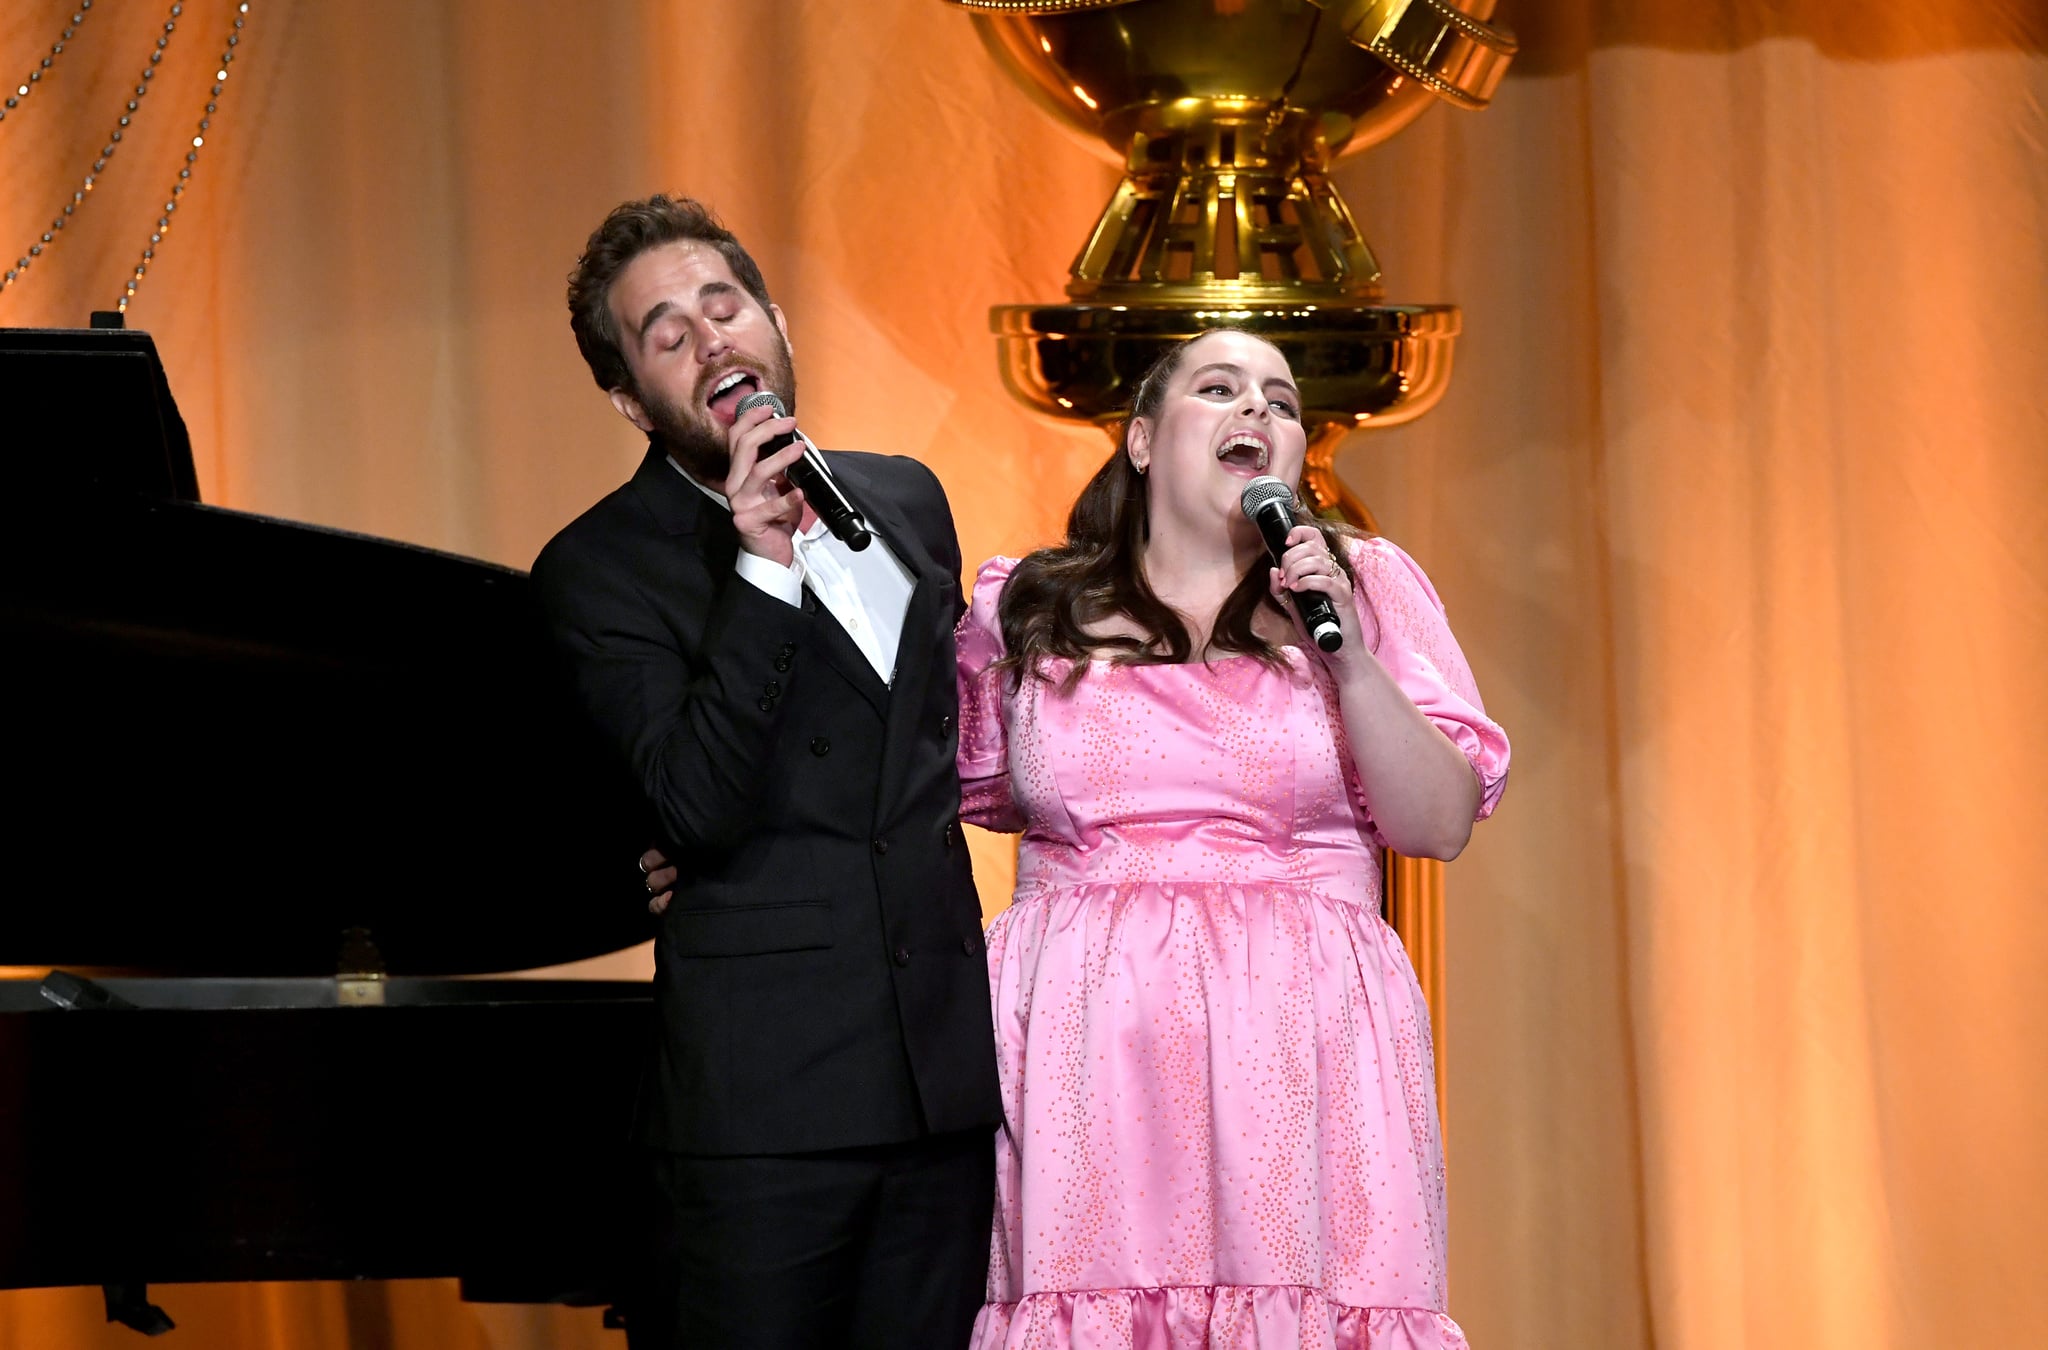 BEVERLY HILLS, CALIFORNIA - JULY 31: (L-R) Ben Platt and Beanie Feldstein speak onstage during Hollywood Foreign Press Association's Annual Grants Banquet at Regent Beverly Wilshire Hotel on July 31, 2019 in Beverly Hills, California. (Photo by Kevin Winter/Getty Images)